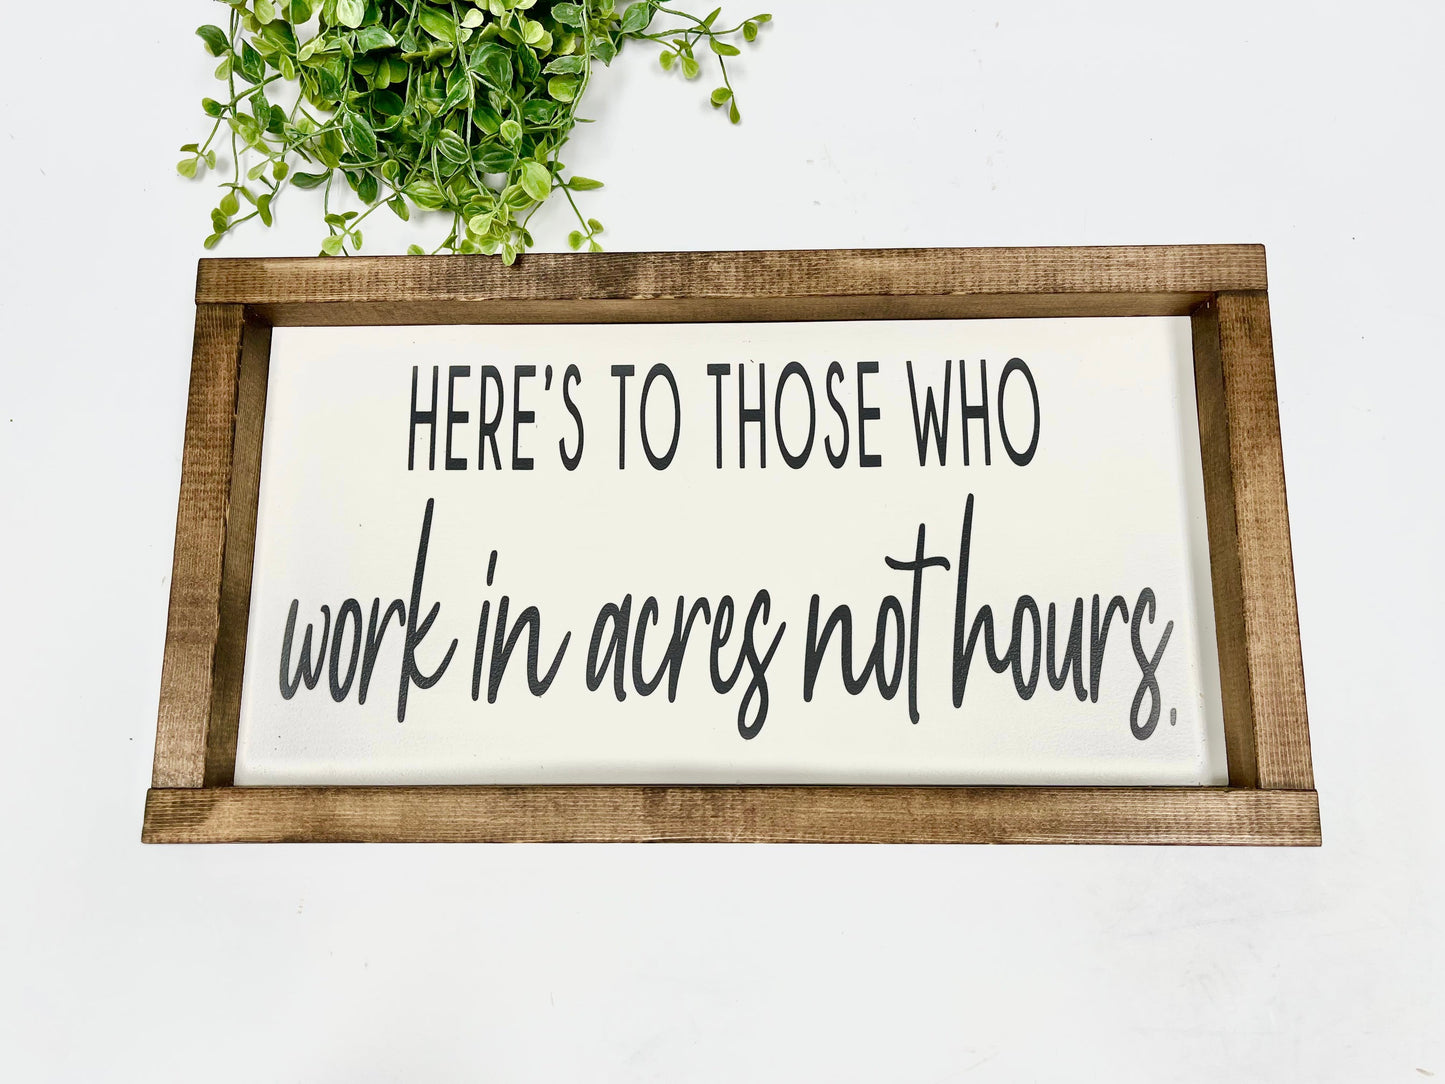 Handmade Sign - Acres not Hours